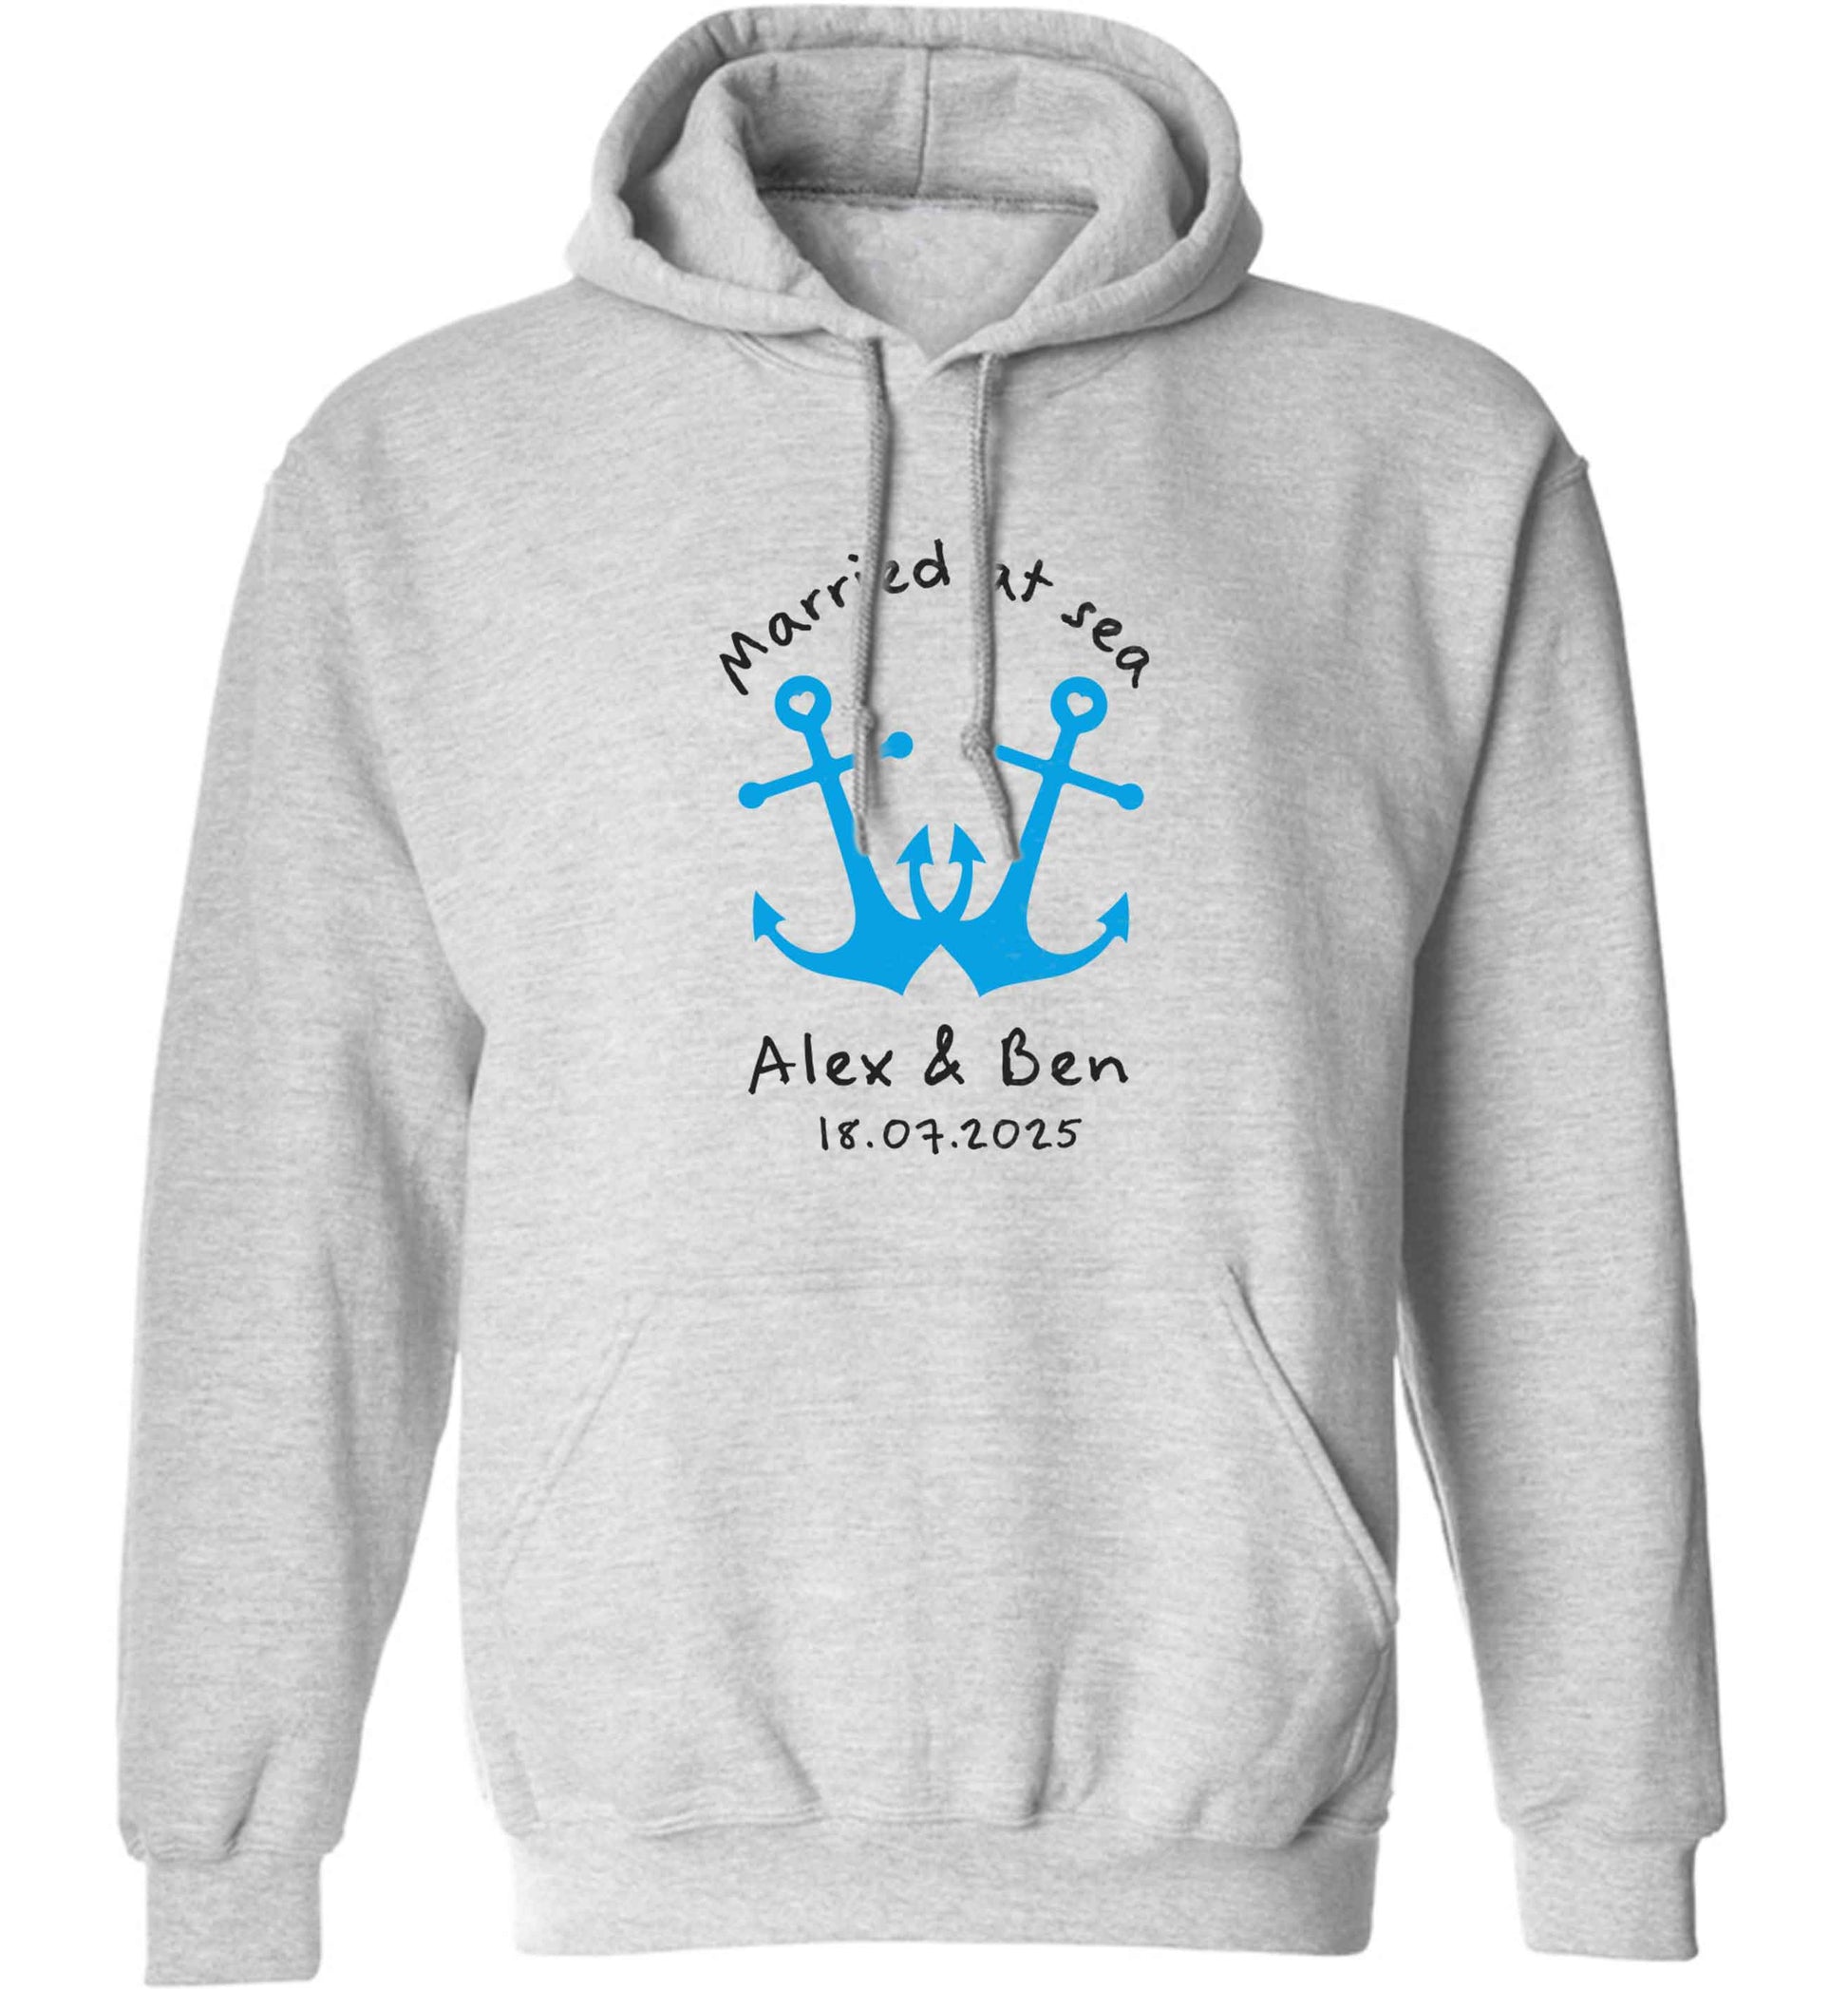 Married at sea blue anchors adults unisex grey hoodie 2XL